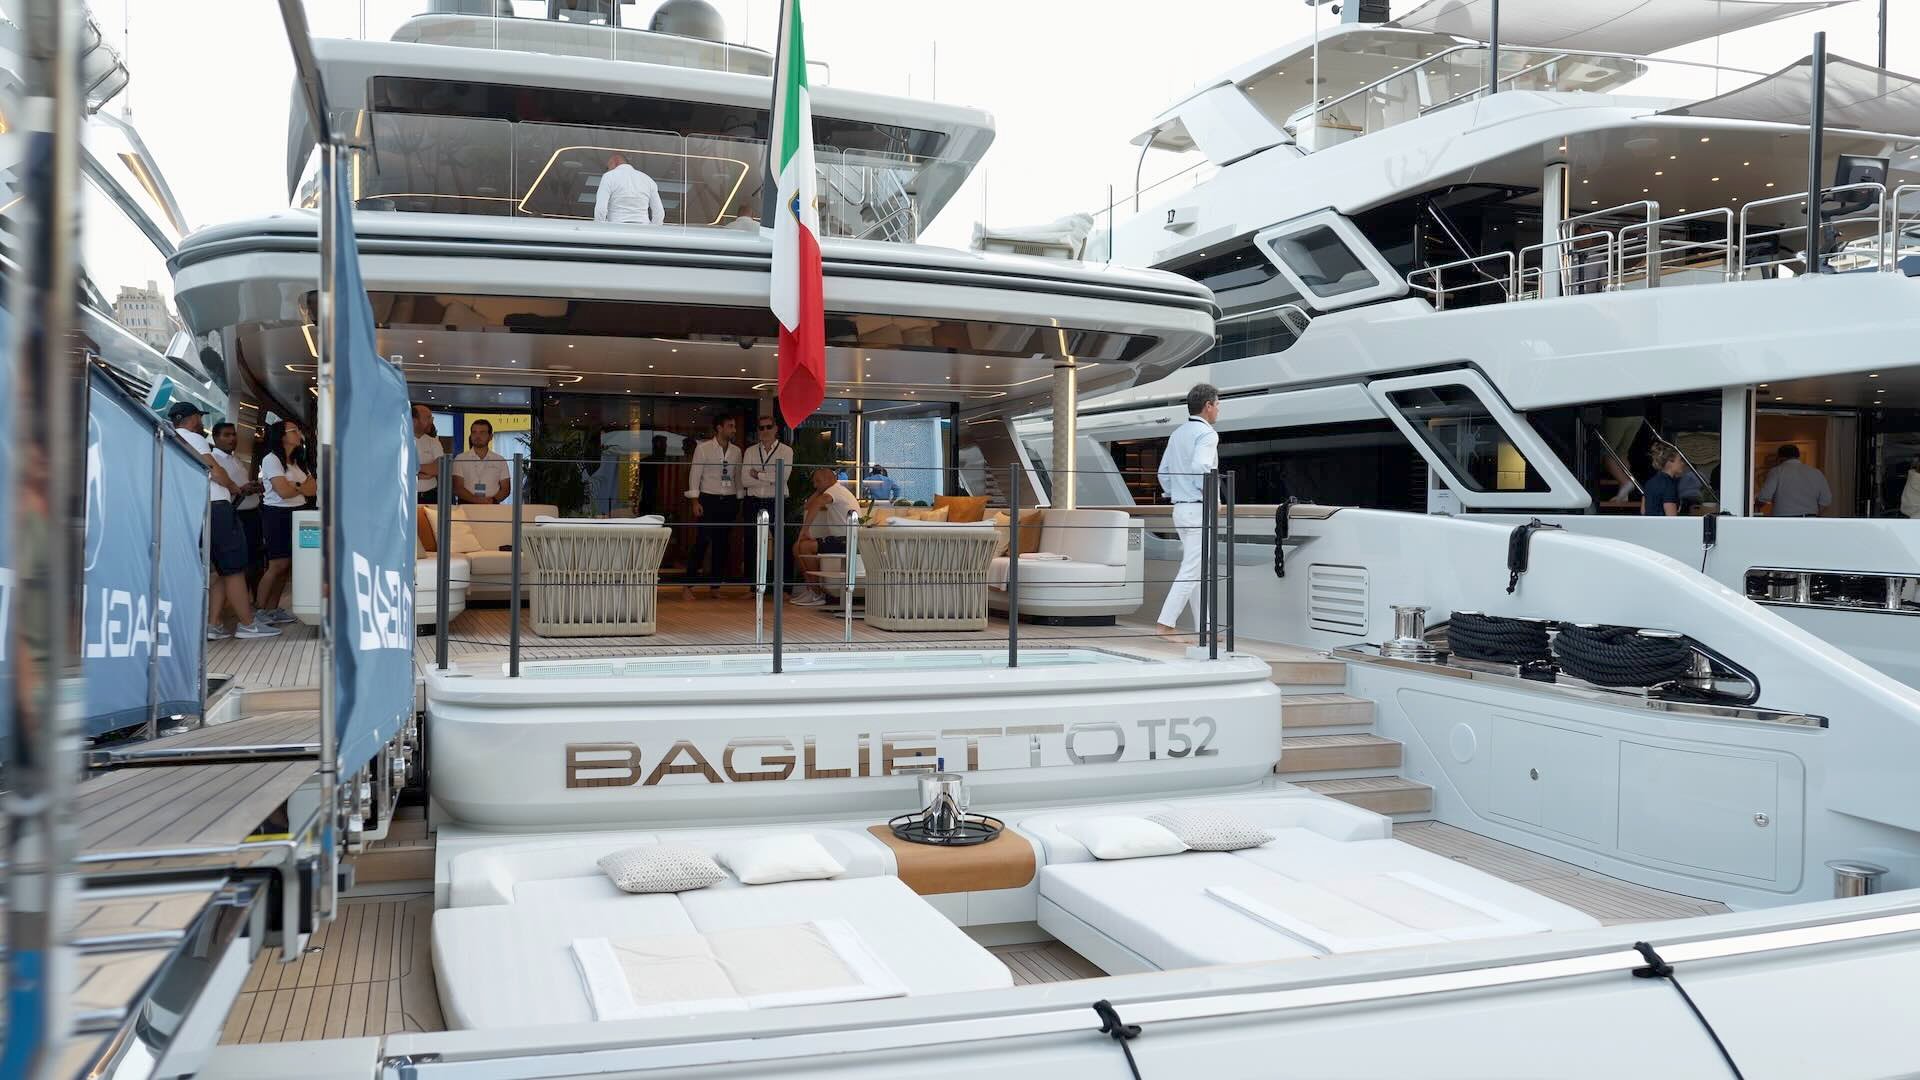 The image shows superyacht Baglietto T52 at the Monaco Yacht Show 2023. The yacht is seen from the rear, with an Italian flag visible. The crew is dressed in white shirts. 